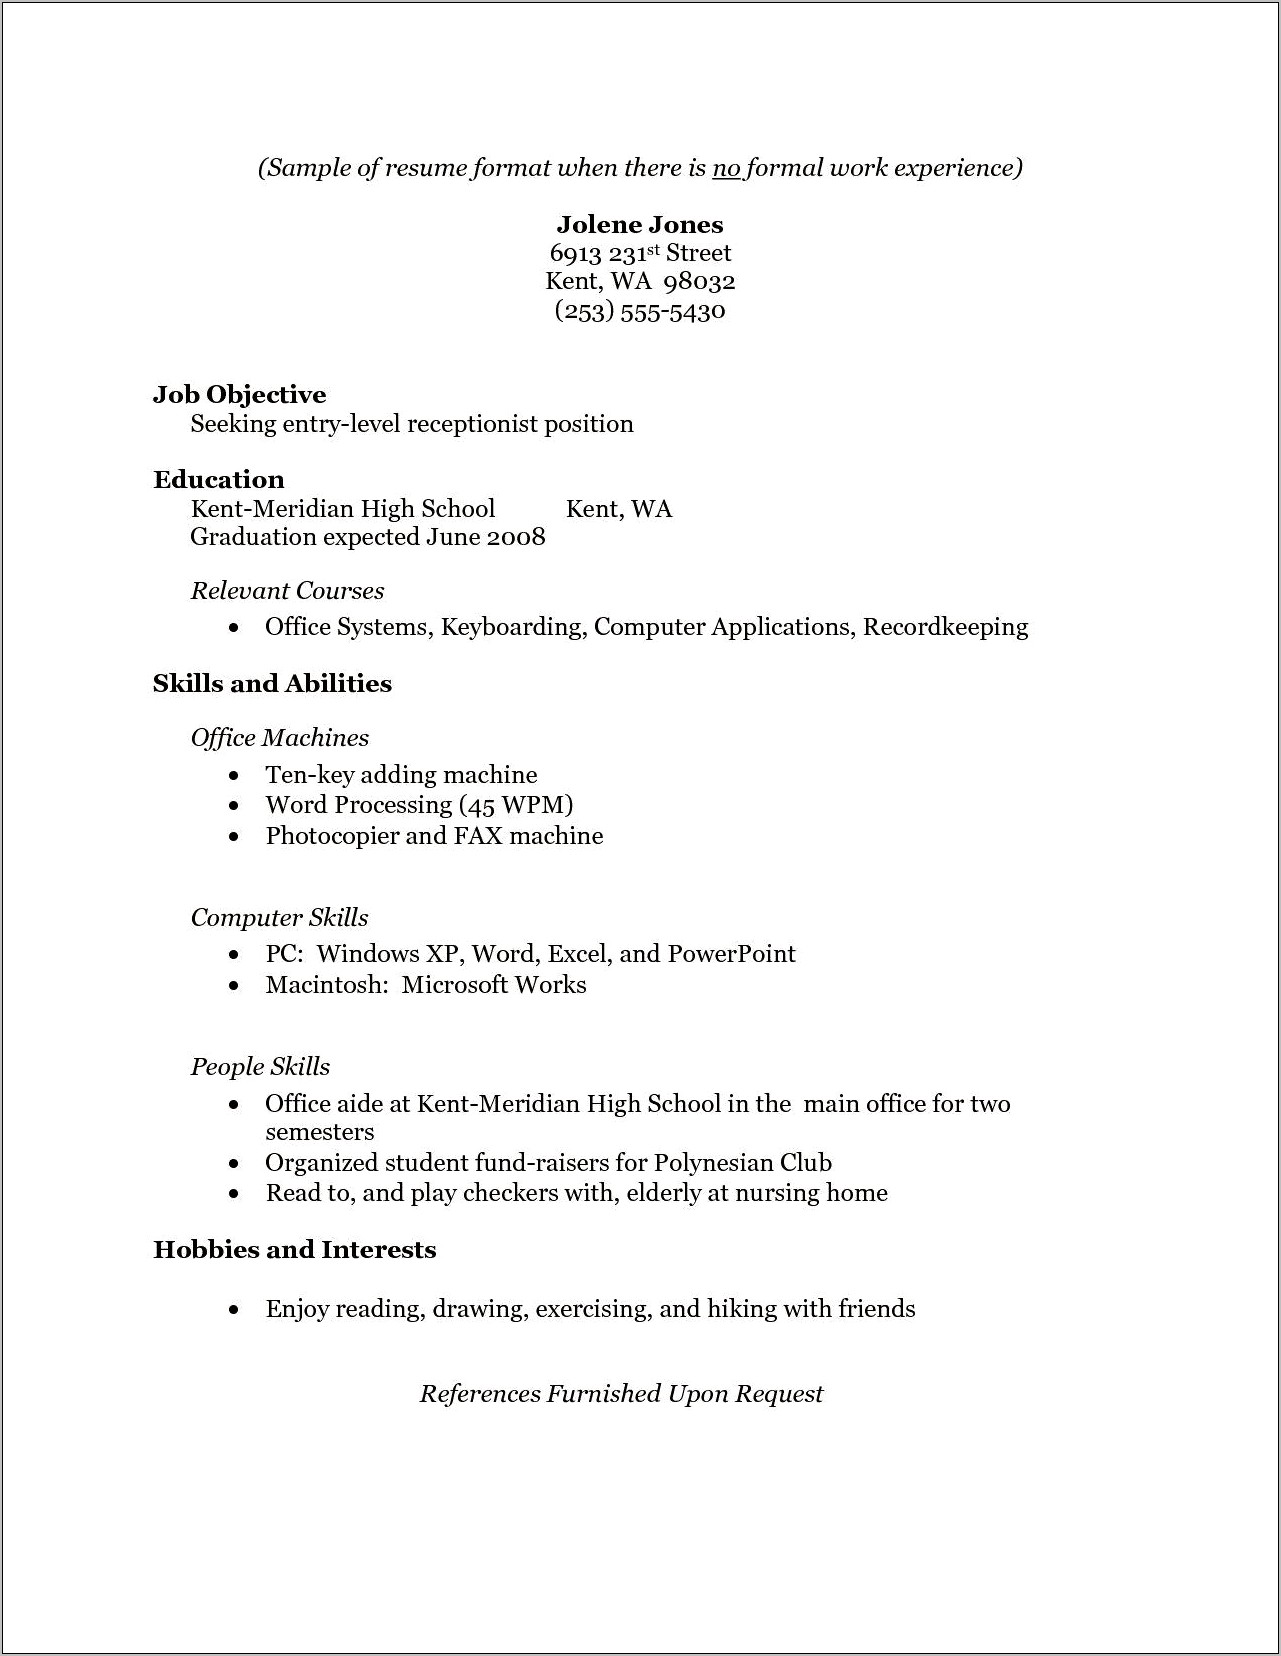 Examples Of Resumes With No Job Expeericne